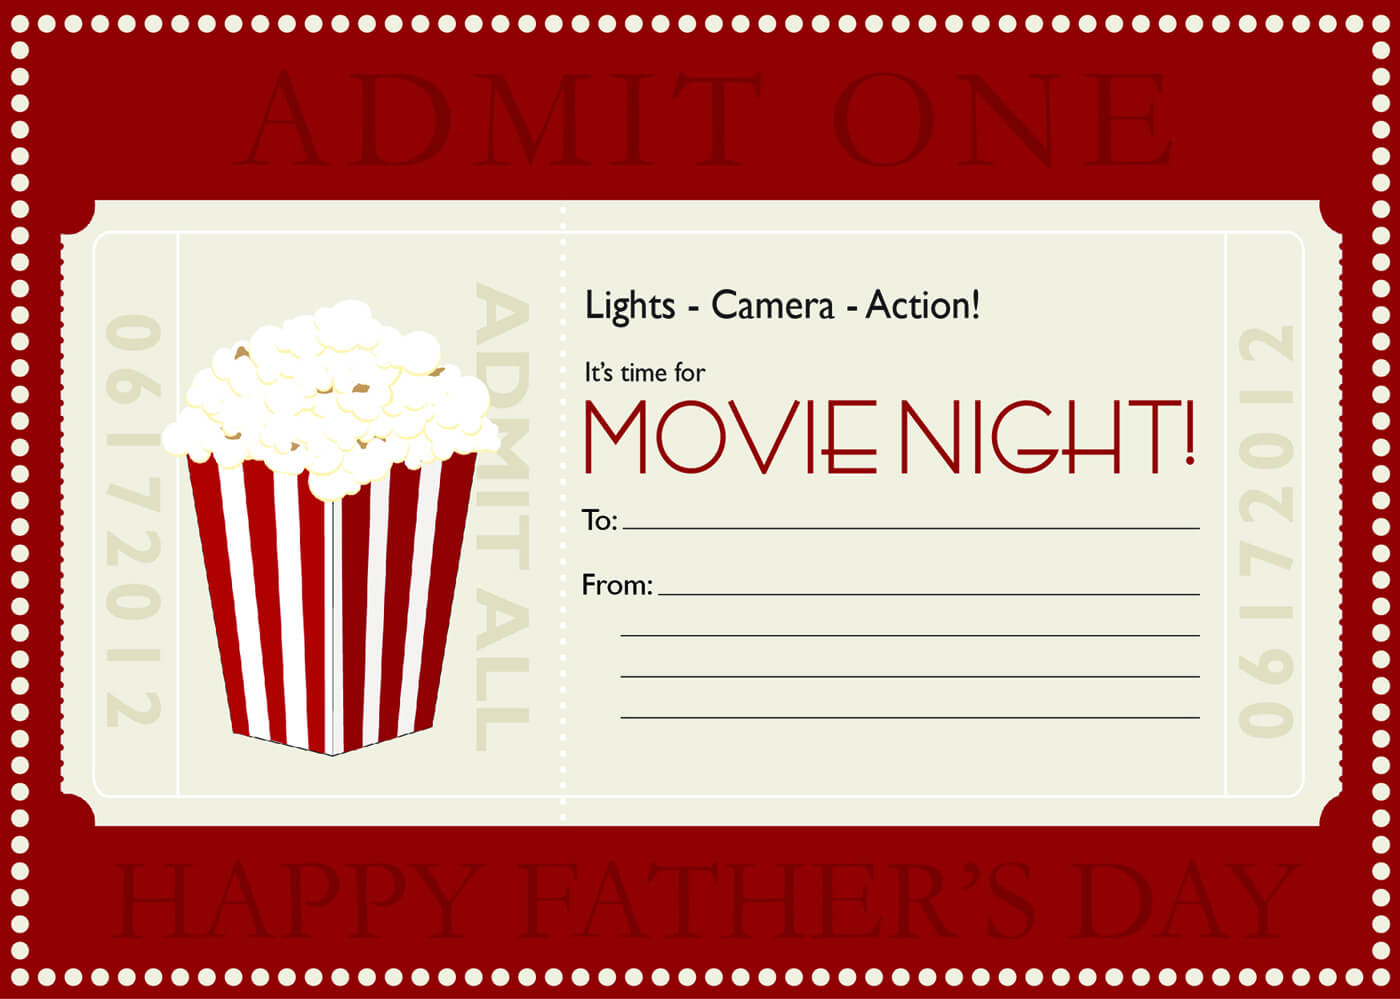 Movie Gift Certificate Templates | Gift Certificate Templates Intended For Movie Gift Certificate Template